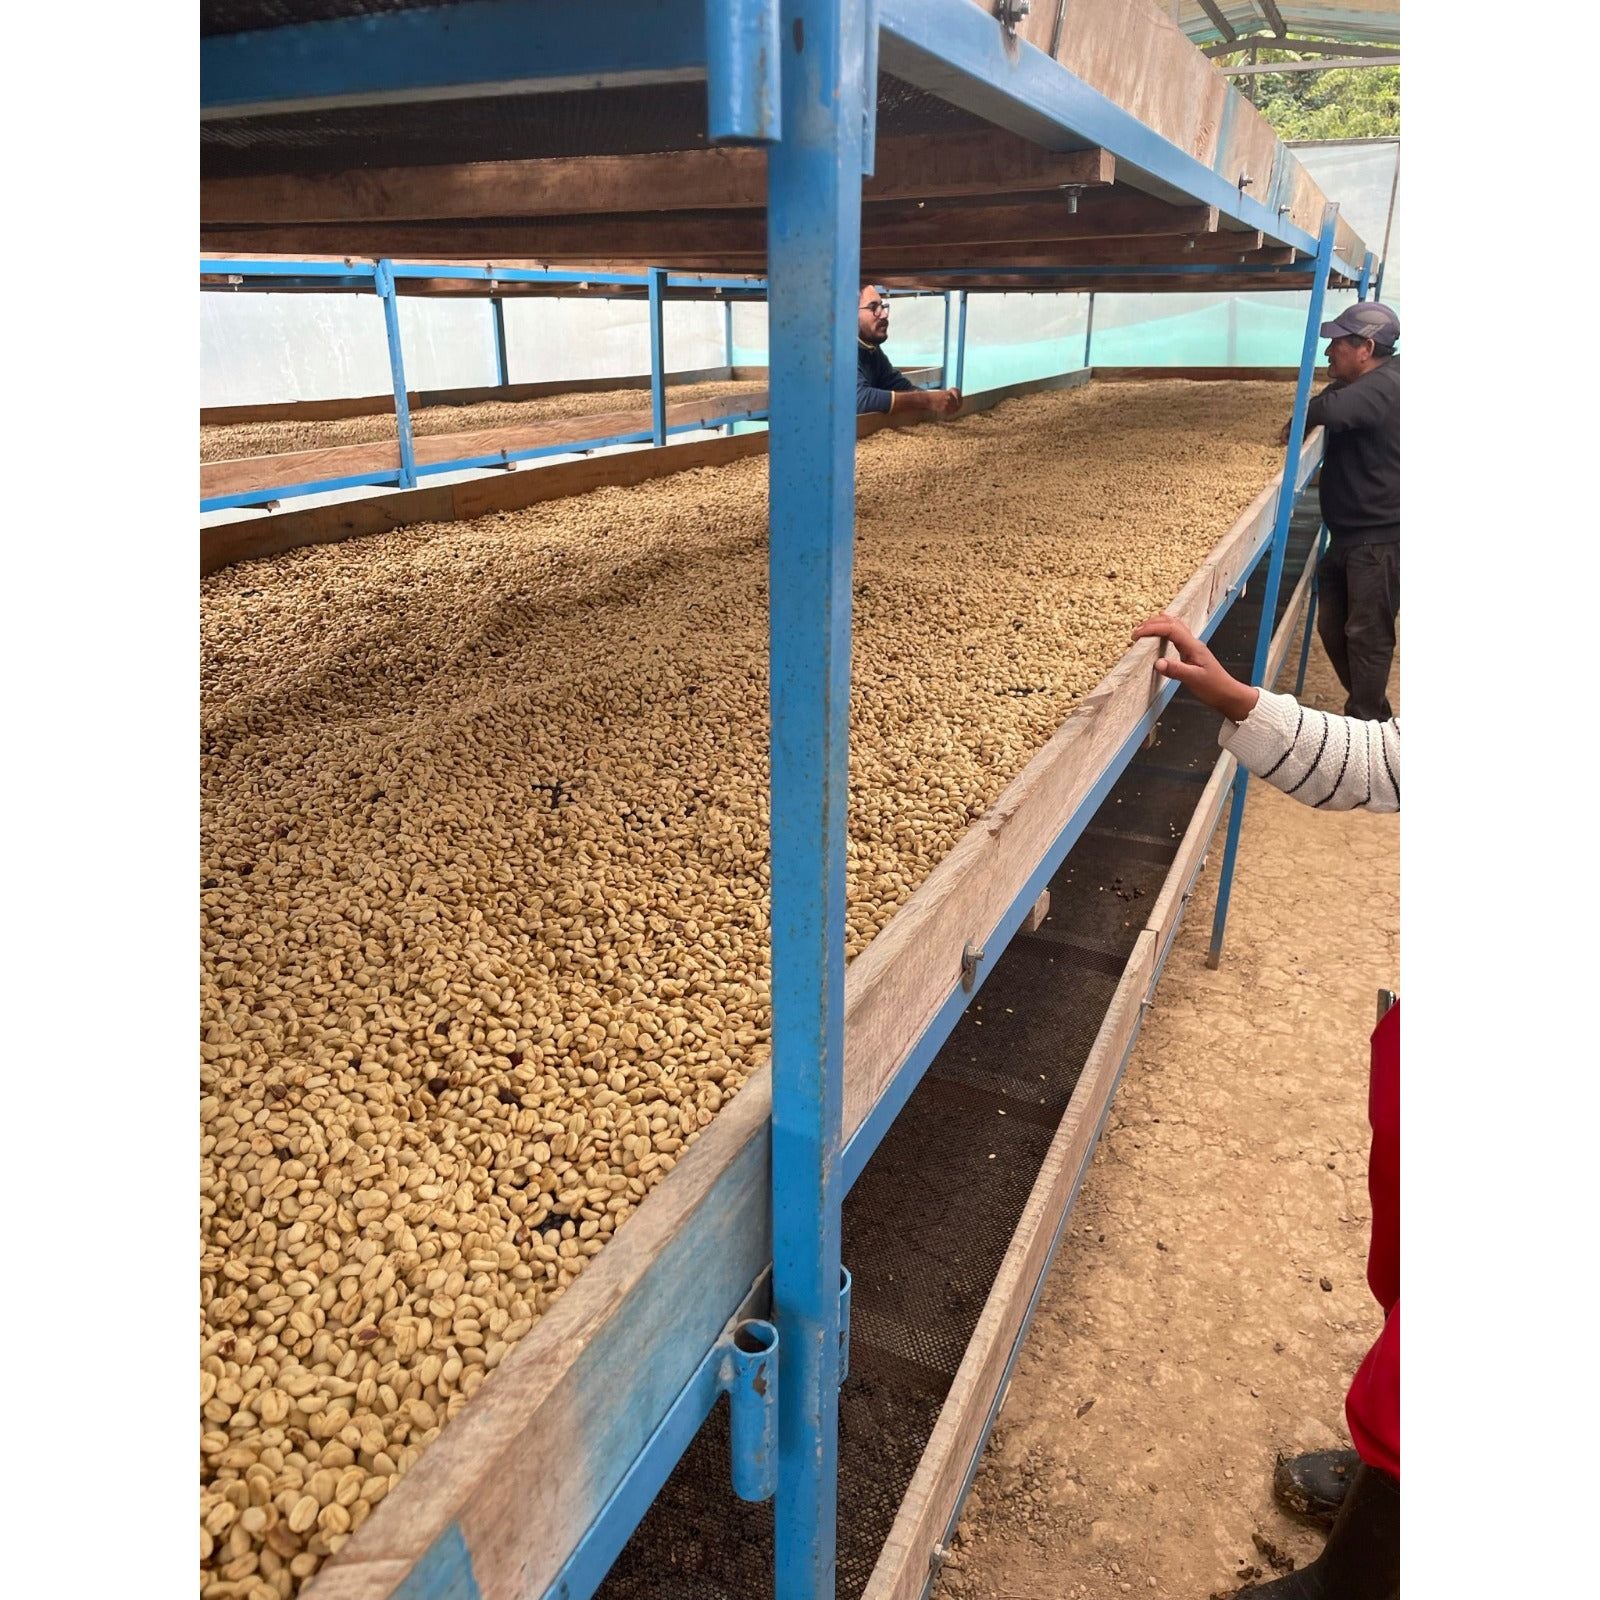 toccto-peru-specialty-coffee-drying-process-farmersvaluefirst